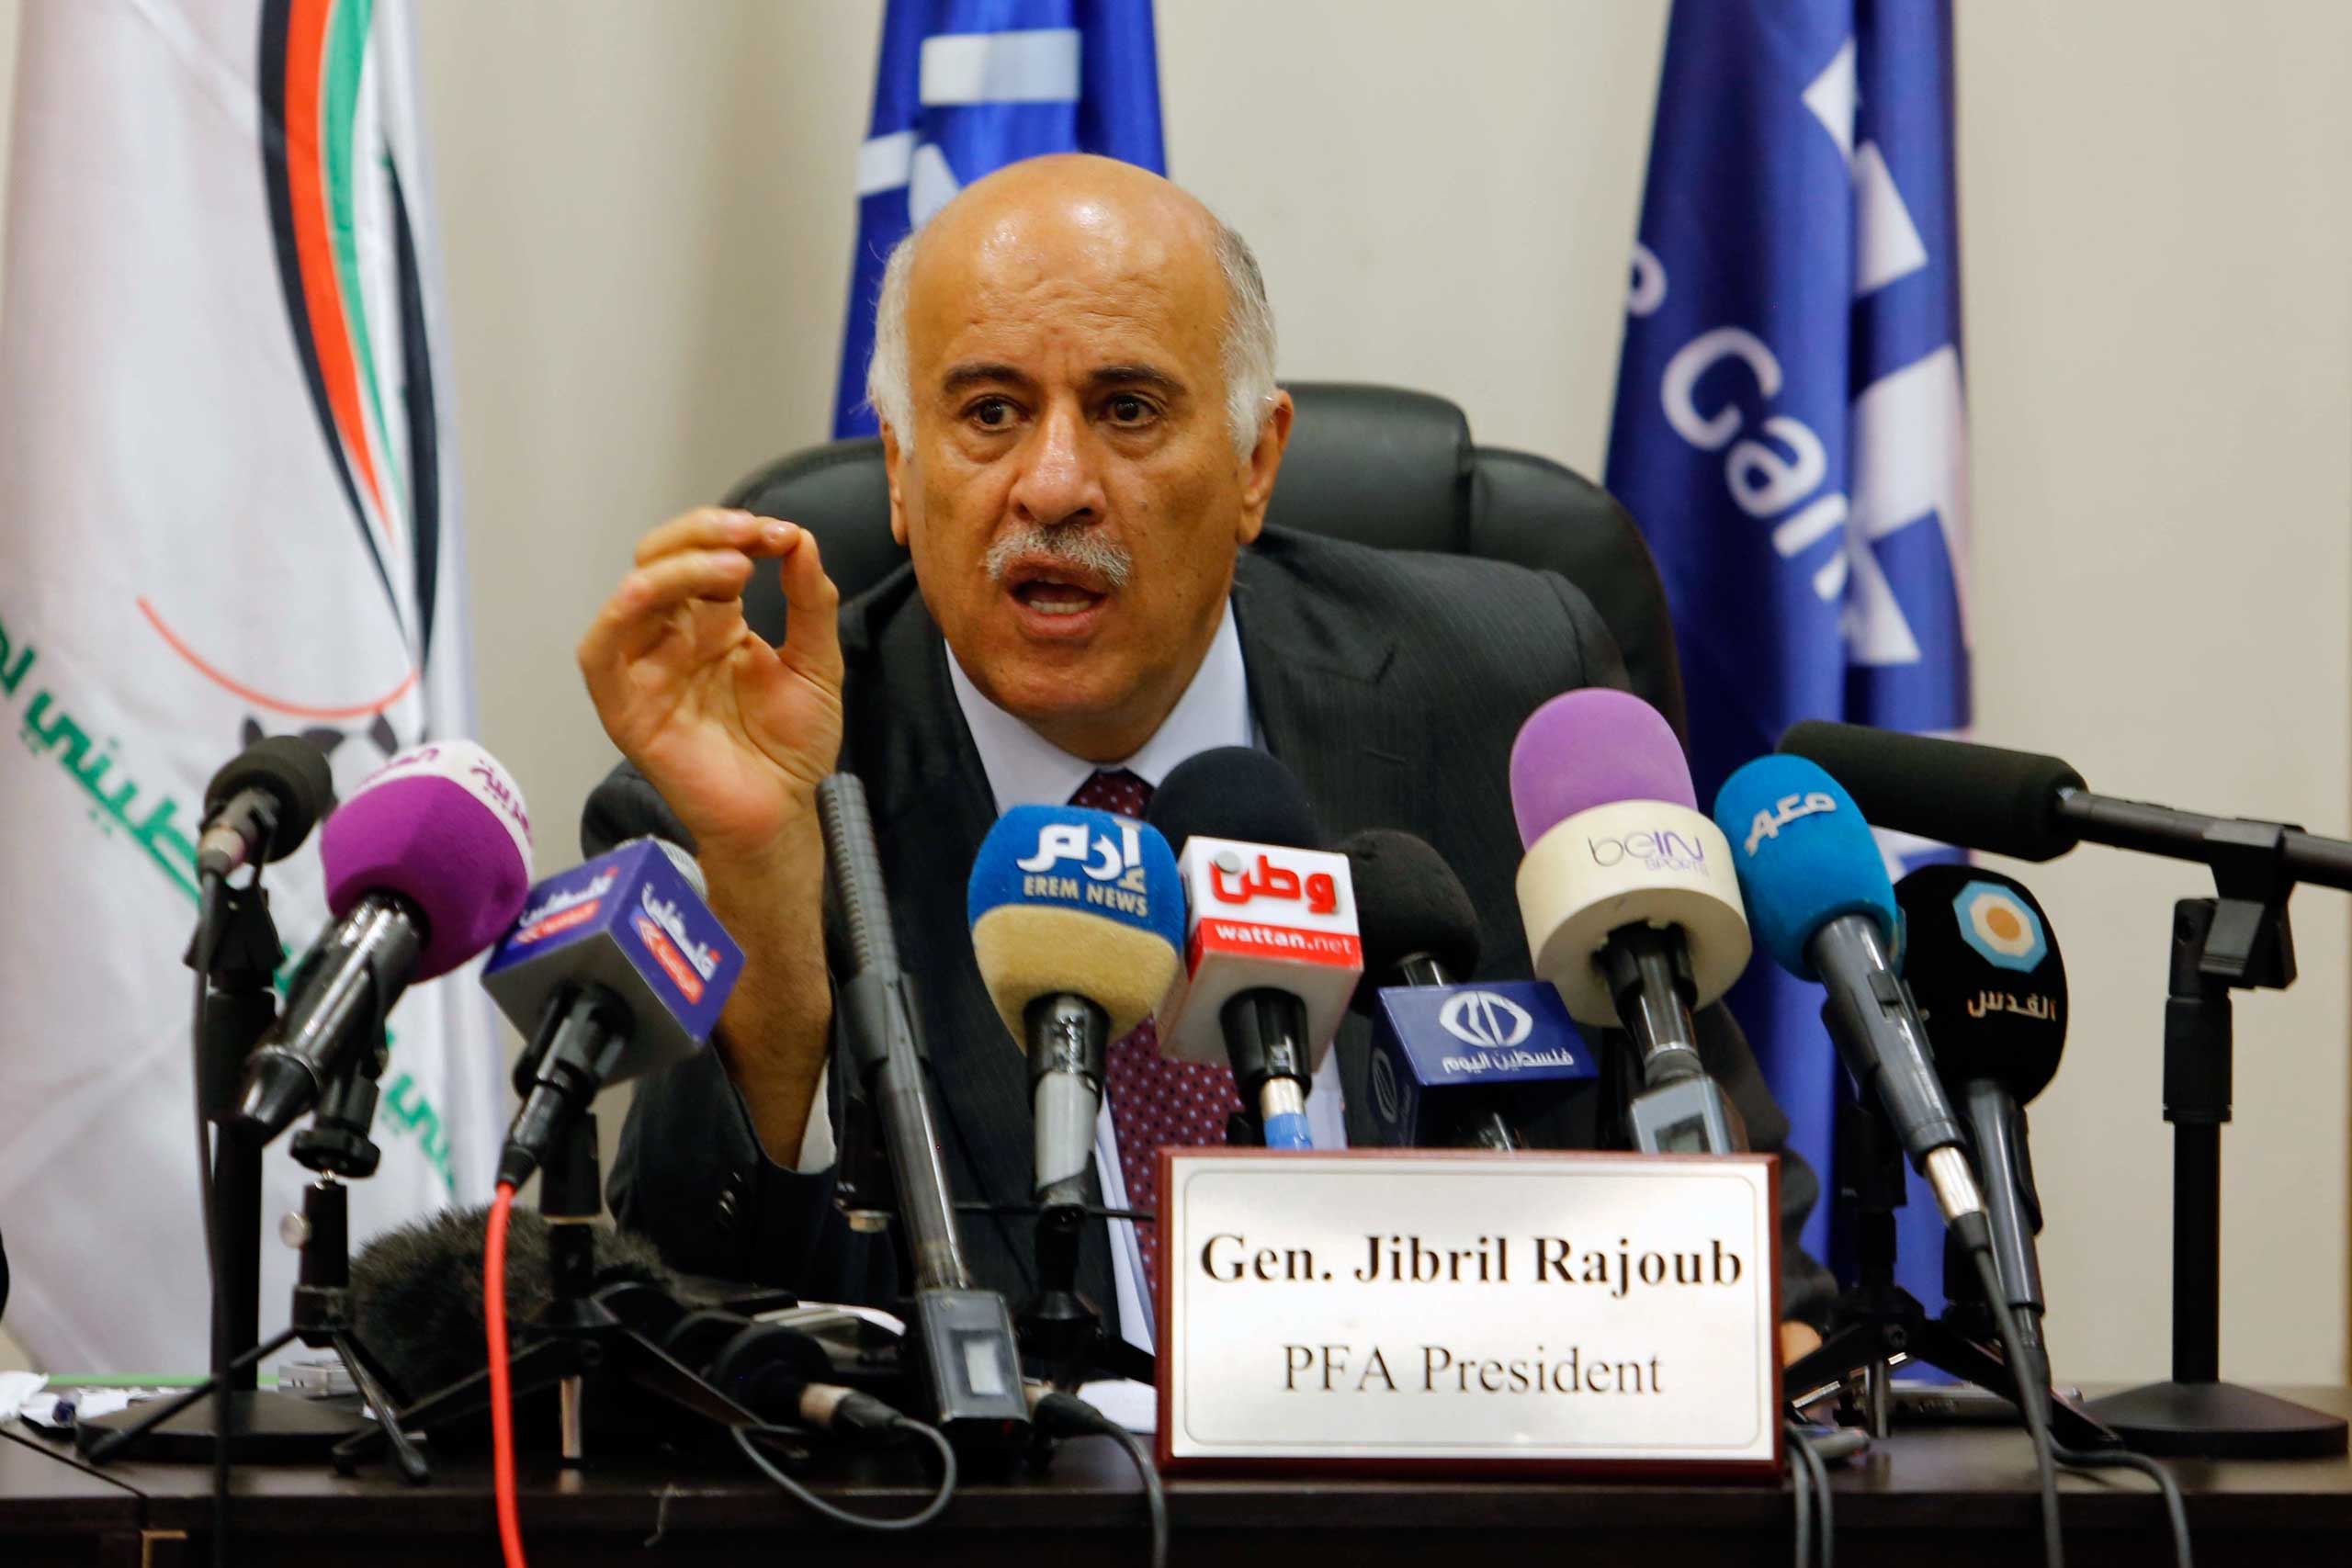 Head of Palestinian football Association Jibril Rajoub speaks during a press conference in Ramallah in the West Bank on May 25, 2015. (Nasser Shiyoukhi—AP)